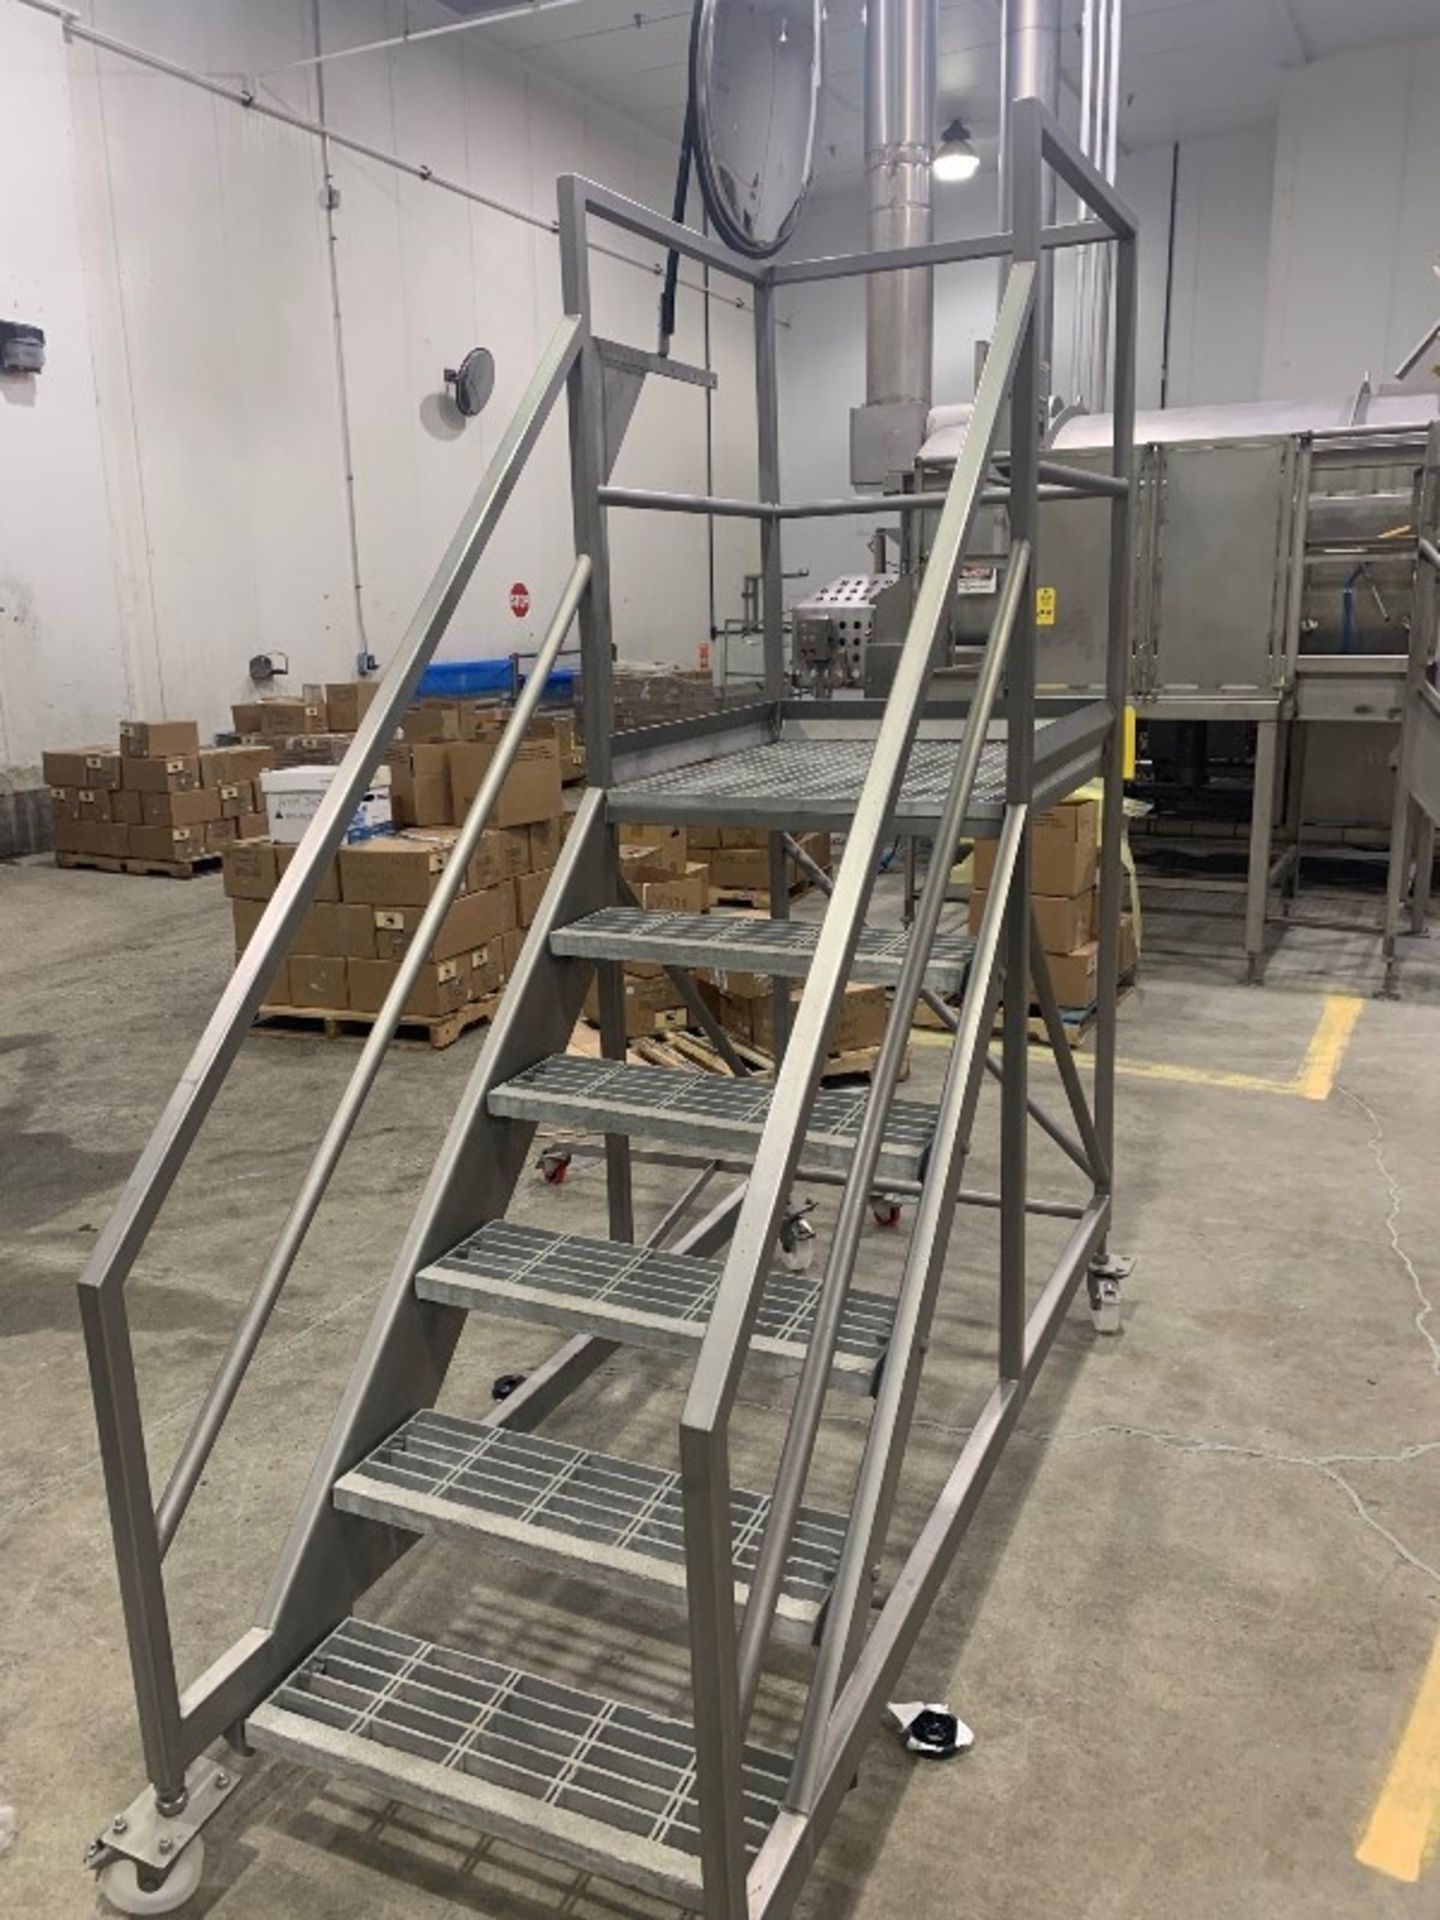 Stainless Steel Portable Stairs, 5-step with hand rails: Required Loading Fee $200.00, Rigger-Norm - Image 2 of 2